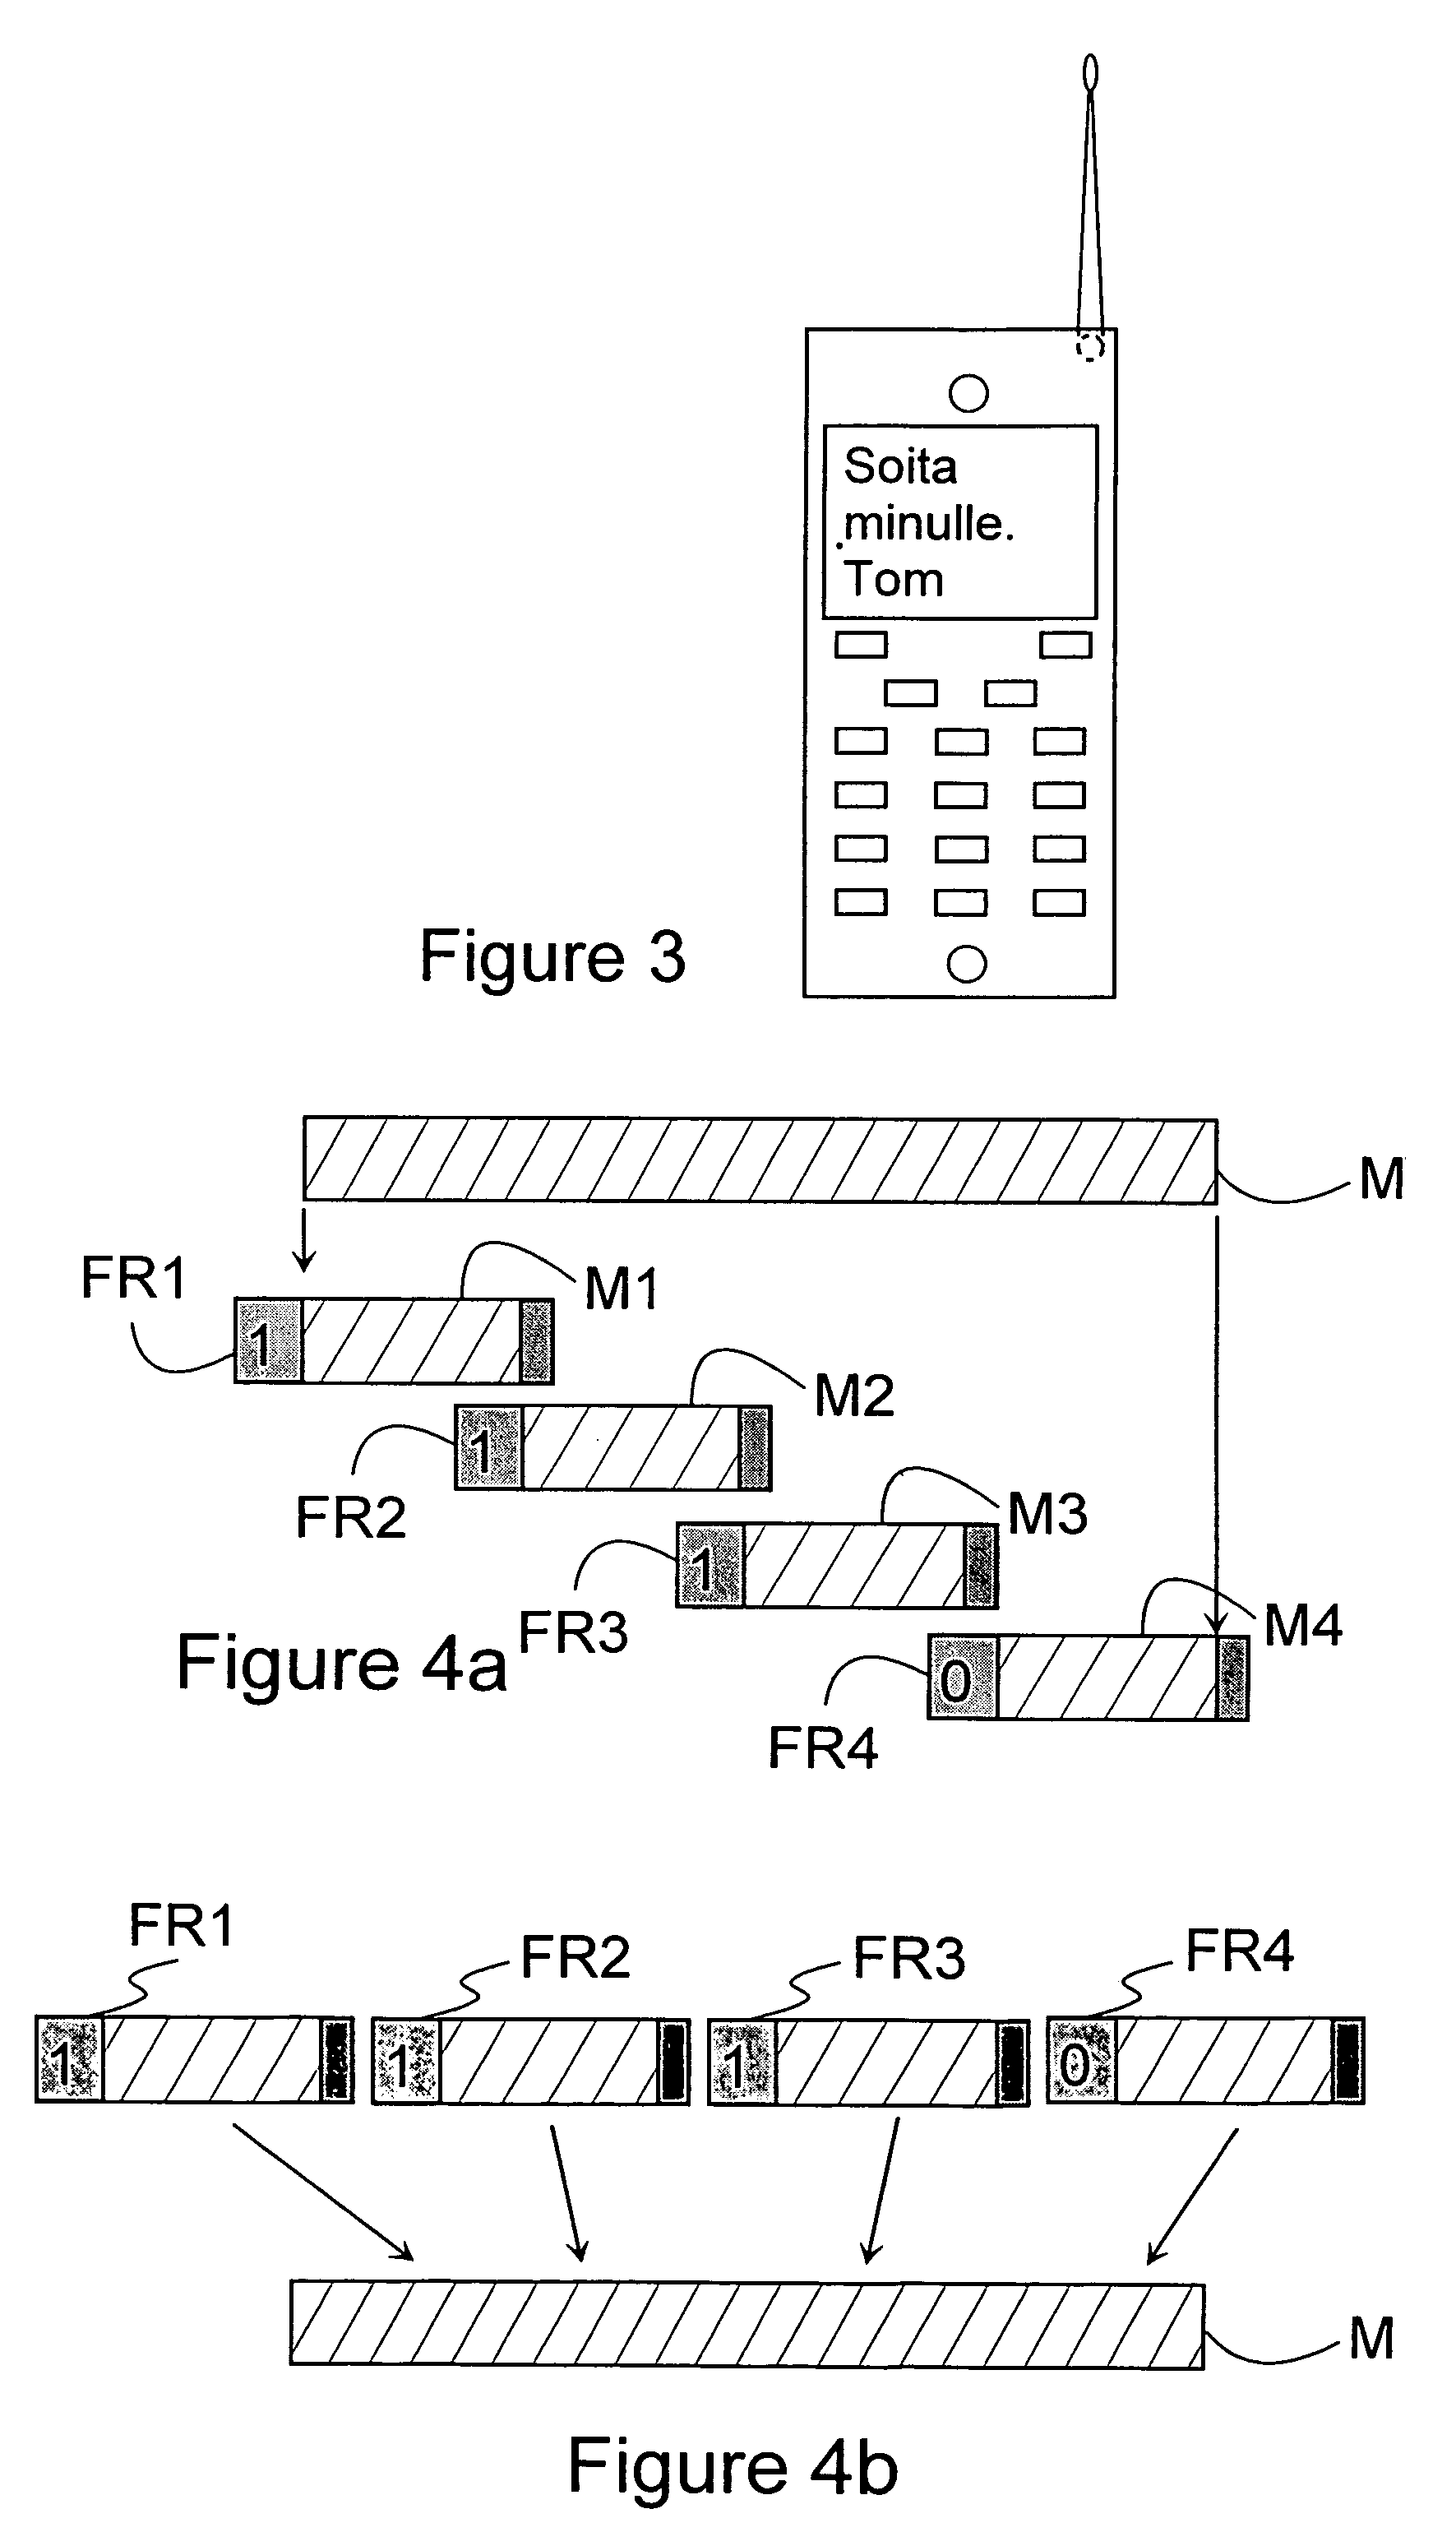 Communication network terminal supporting a plurality of applications